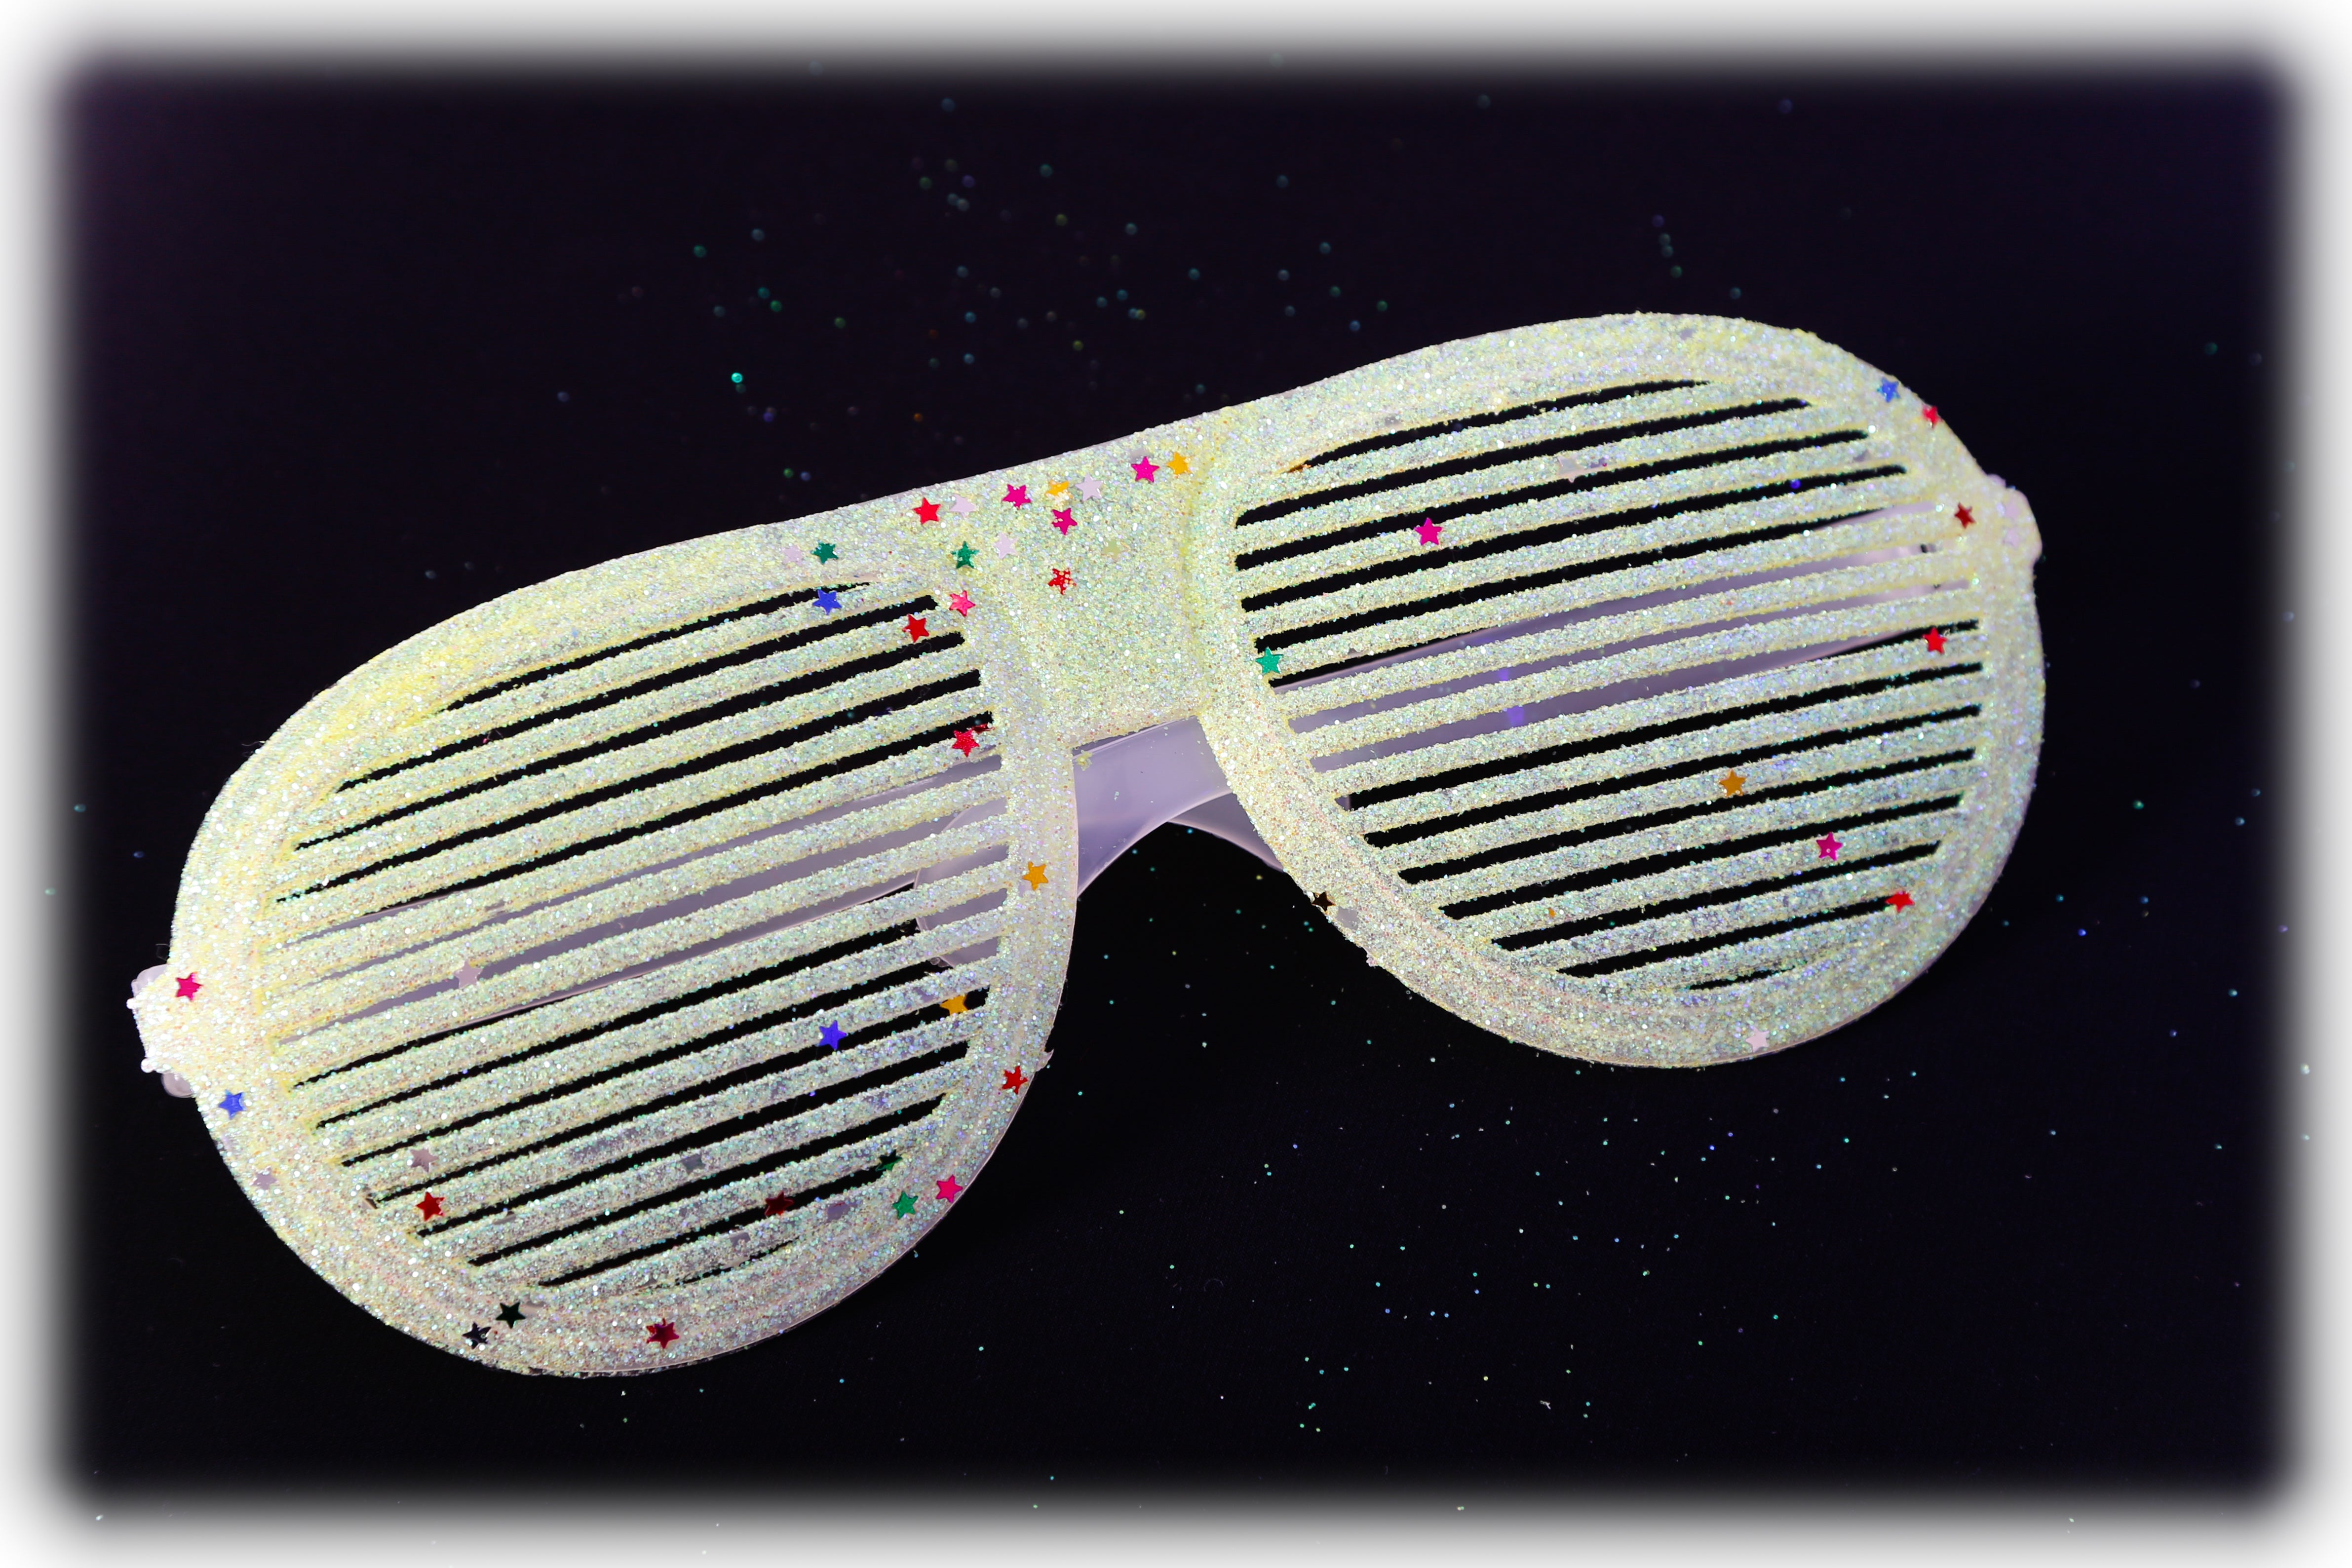 Electro Glow big plastic glasses image 3 | South Africa's Best LED Festival Gear & Rave Clothes - festivals outfits, clothes festival, festival clothing south africa, festival ideas outfits, festival outfits rave, festival wear, steam punk goggle, rave glasses, outfit for a rave, kaleidoscope glasses, diffraction glasses, clothes for a rave, rave sunglasses, spectral glasses, rave goggles, clothes for a rave, rave clothing south africa, festival wear south africa, accessories festival, rave sunglasses